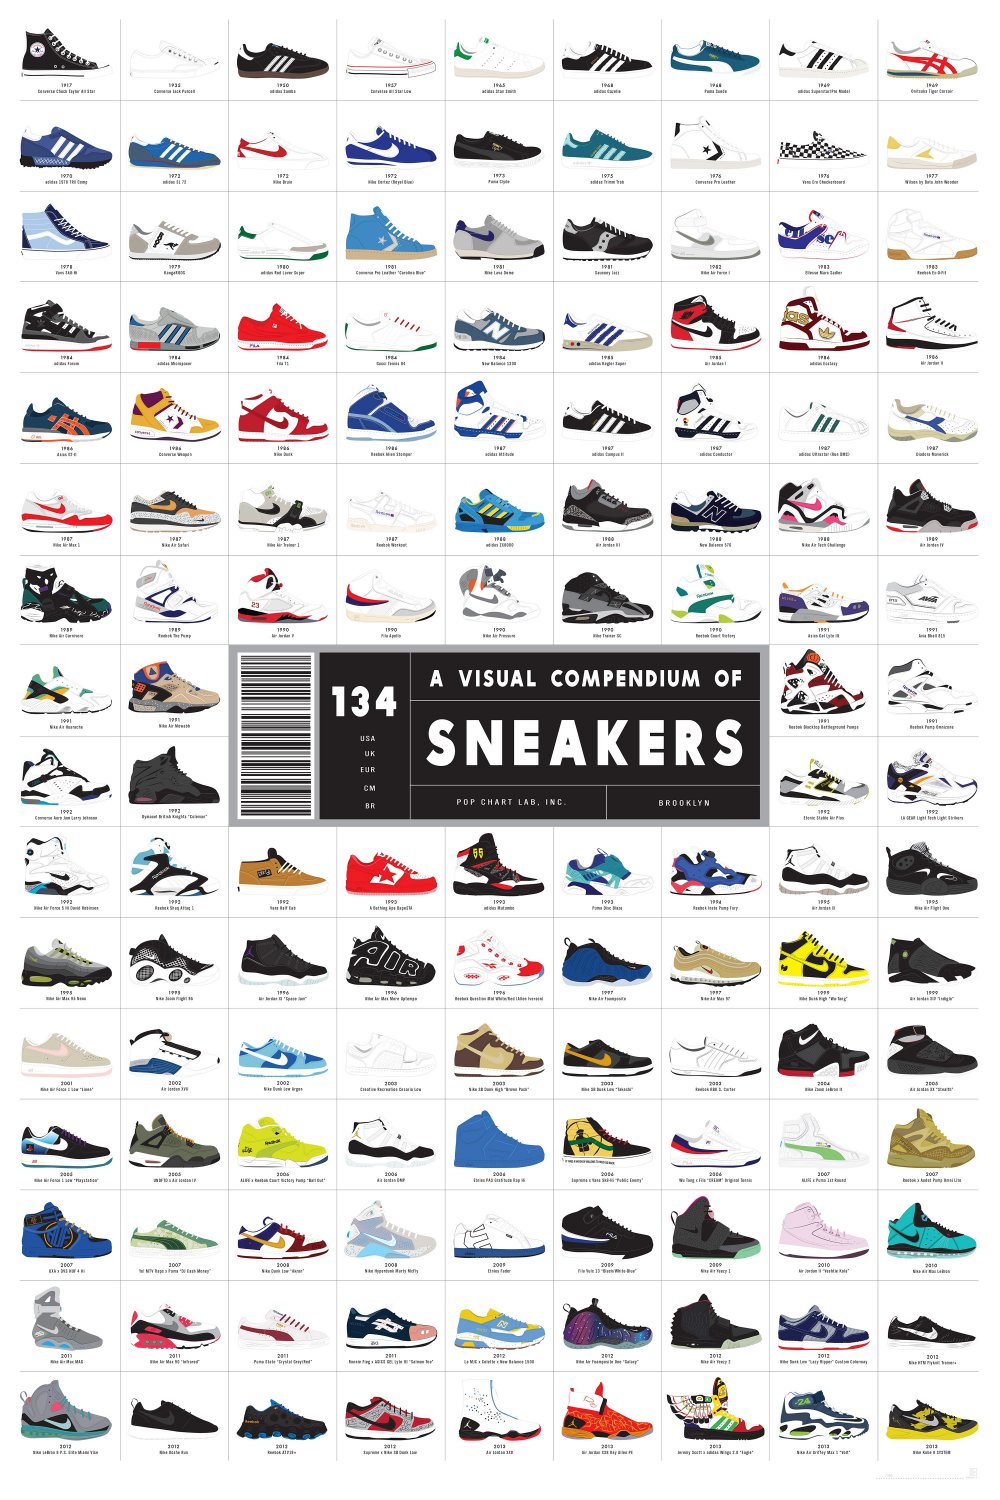 A Visual Compendium of Sneakers Chart 13"x19" (32cm/49cm) Canvas Print